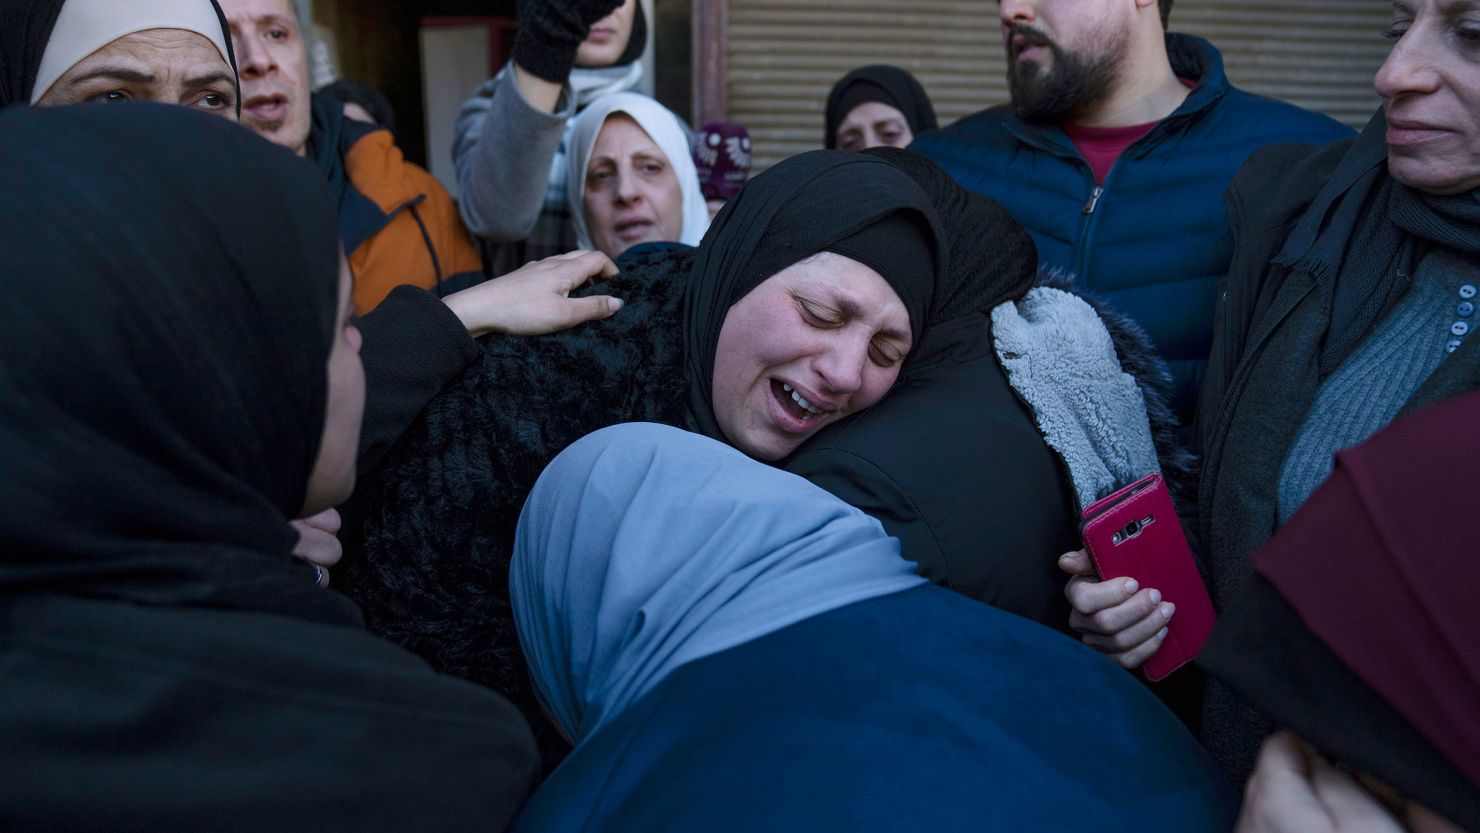 Ghorud Bustami cries while taking the last look at the body of her son Amir Bustami, 21, during his funeral in the West Bank city of Nablus. The Israeli military said the overnight raid was in response to the killing of Ido Baruch in an attack near the settlement of Shavei Shomron in the occupied West Bank on October 11, 2022.